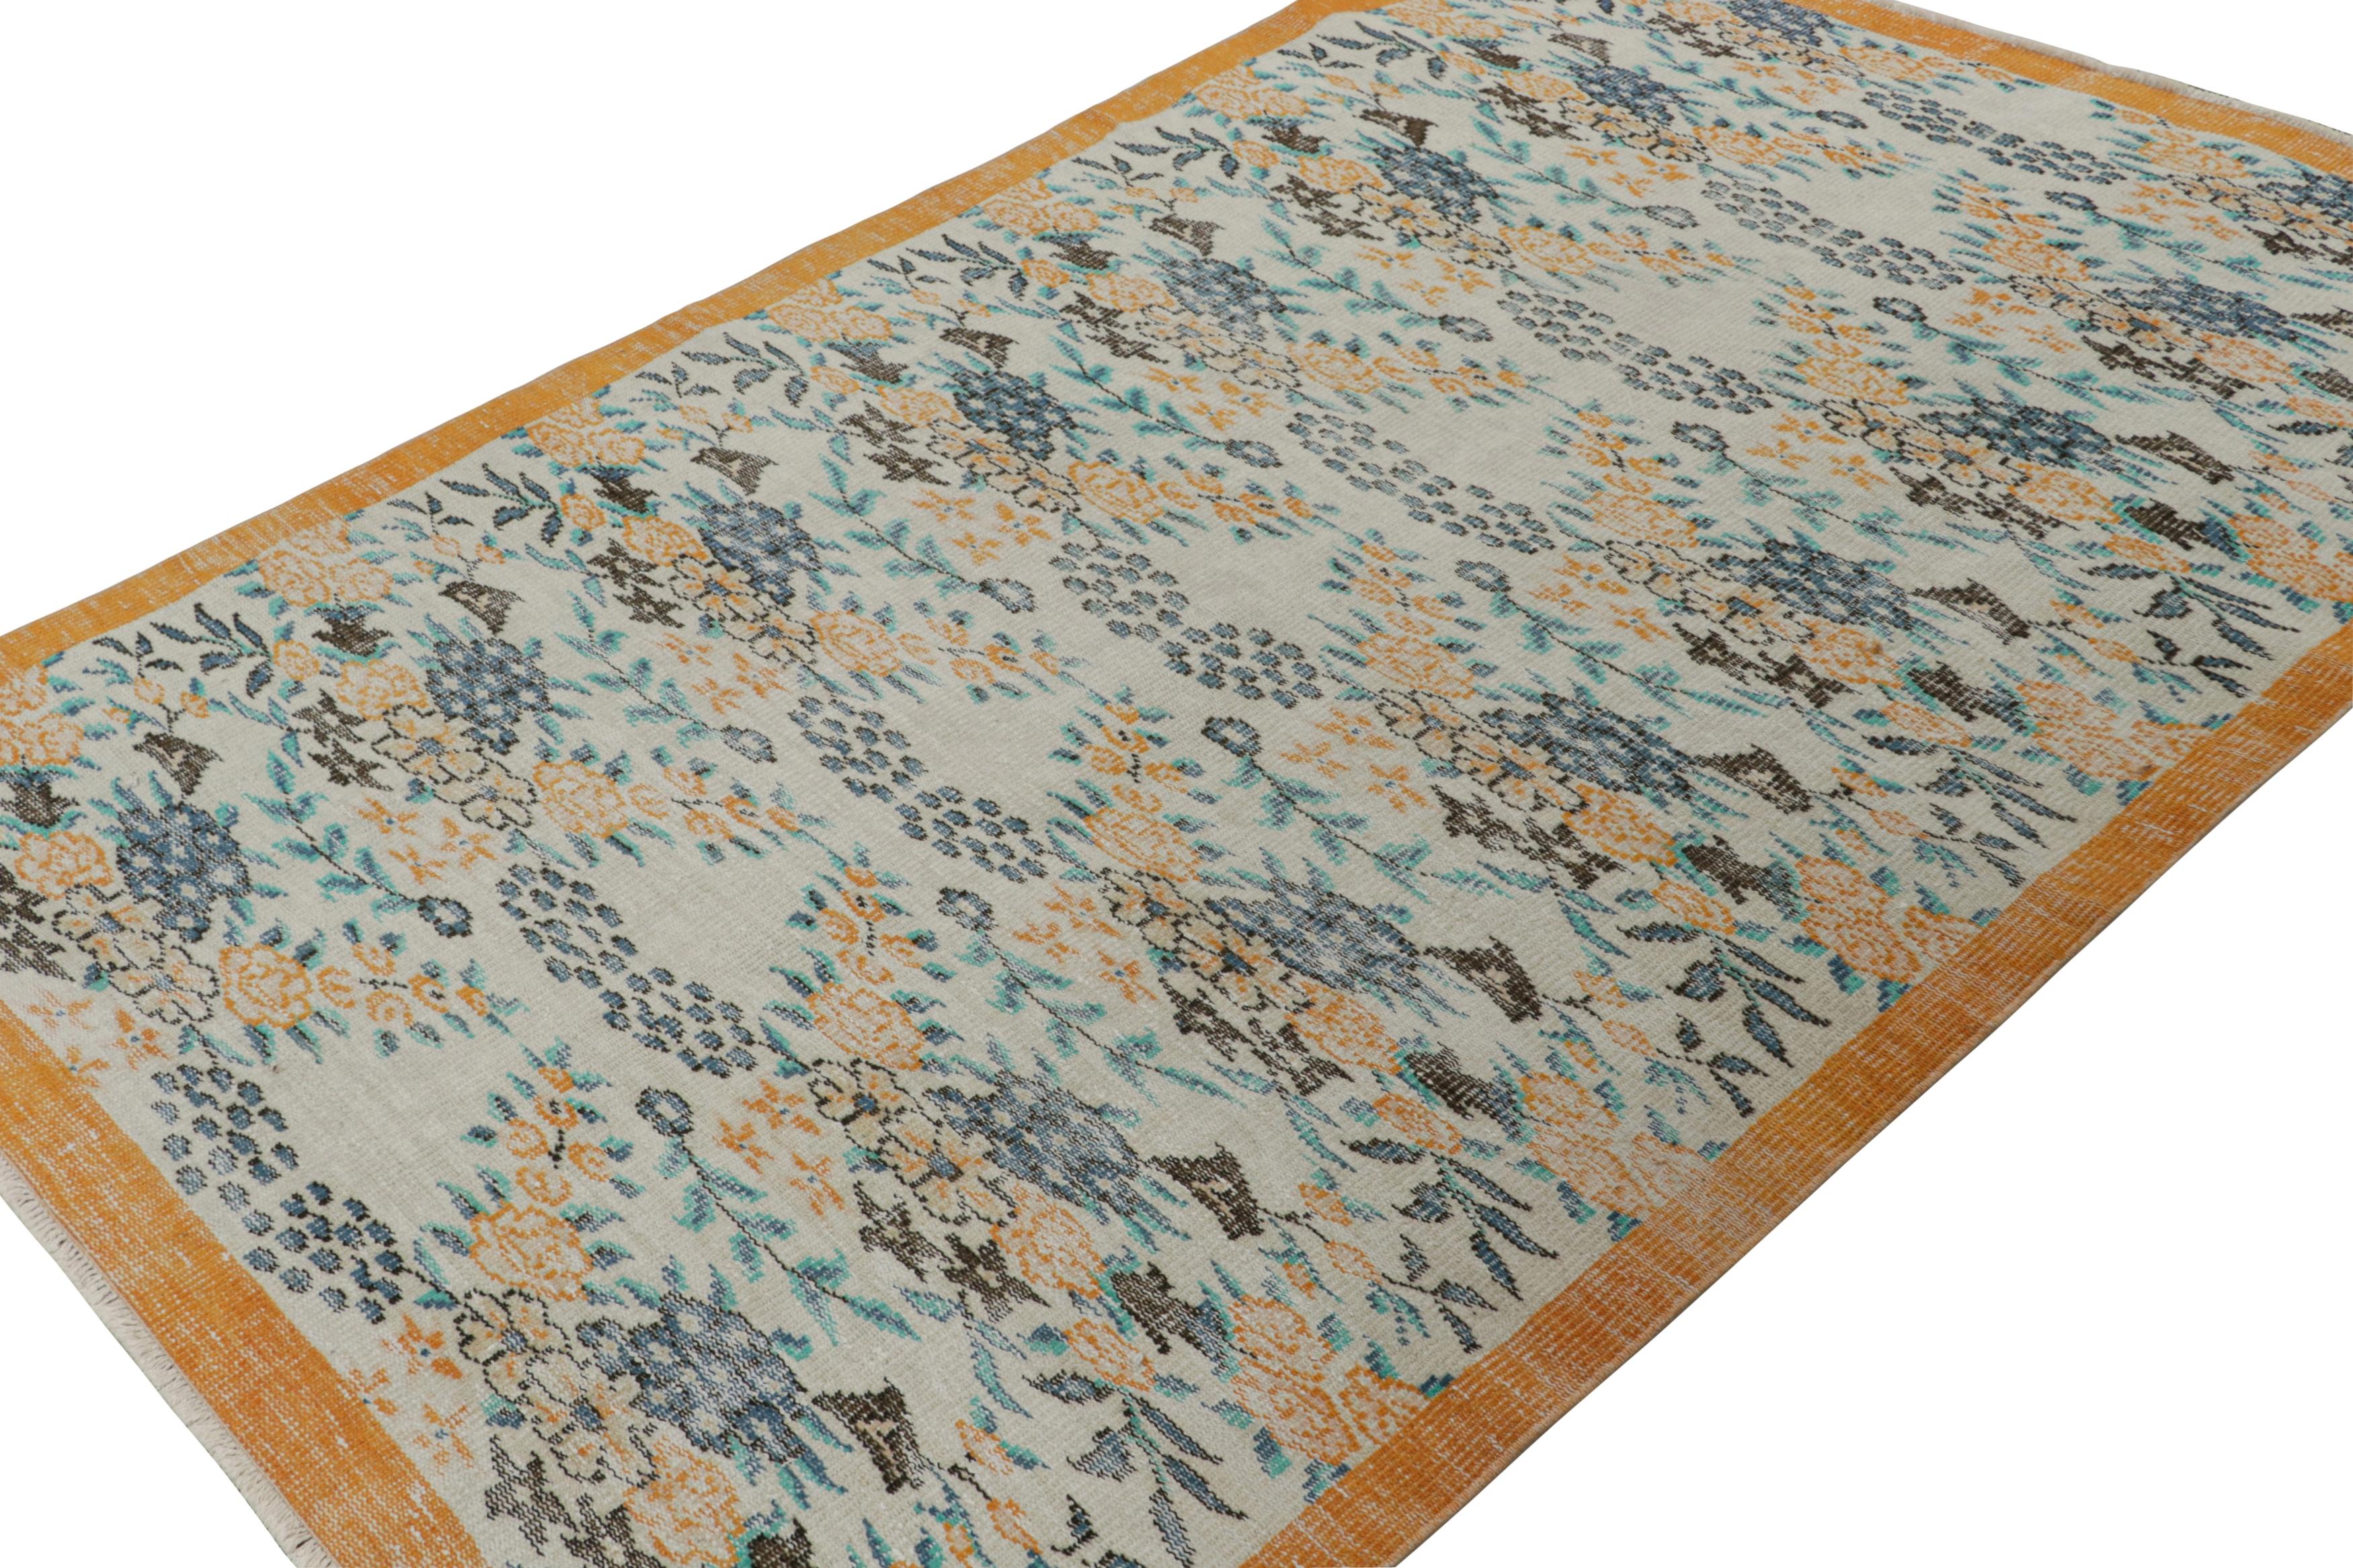 Hand-knotted in wool, circa 1960 - 1970, this 5x9 vintage Müren rug is an exciting new addition to Rug & Kilim Mid-century Pasha Collection. Its design is believed to be a rare work of mid-century atelier Zeki Müren. 

On the Design: 

Featuring a